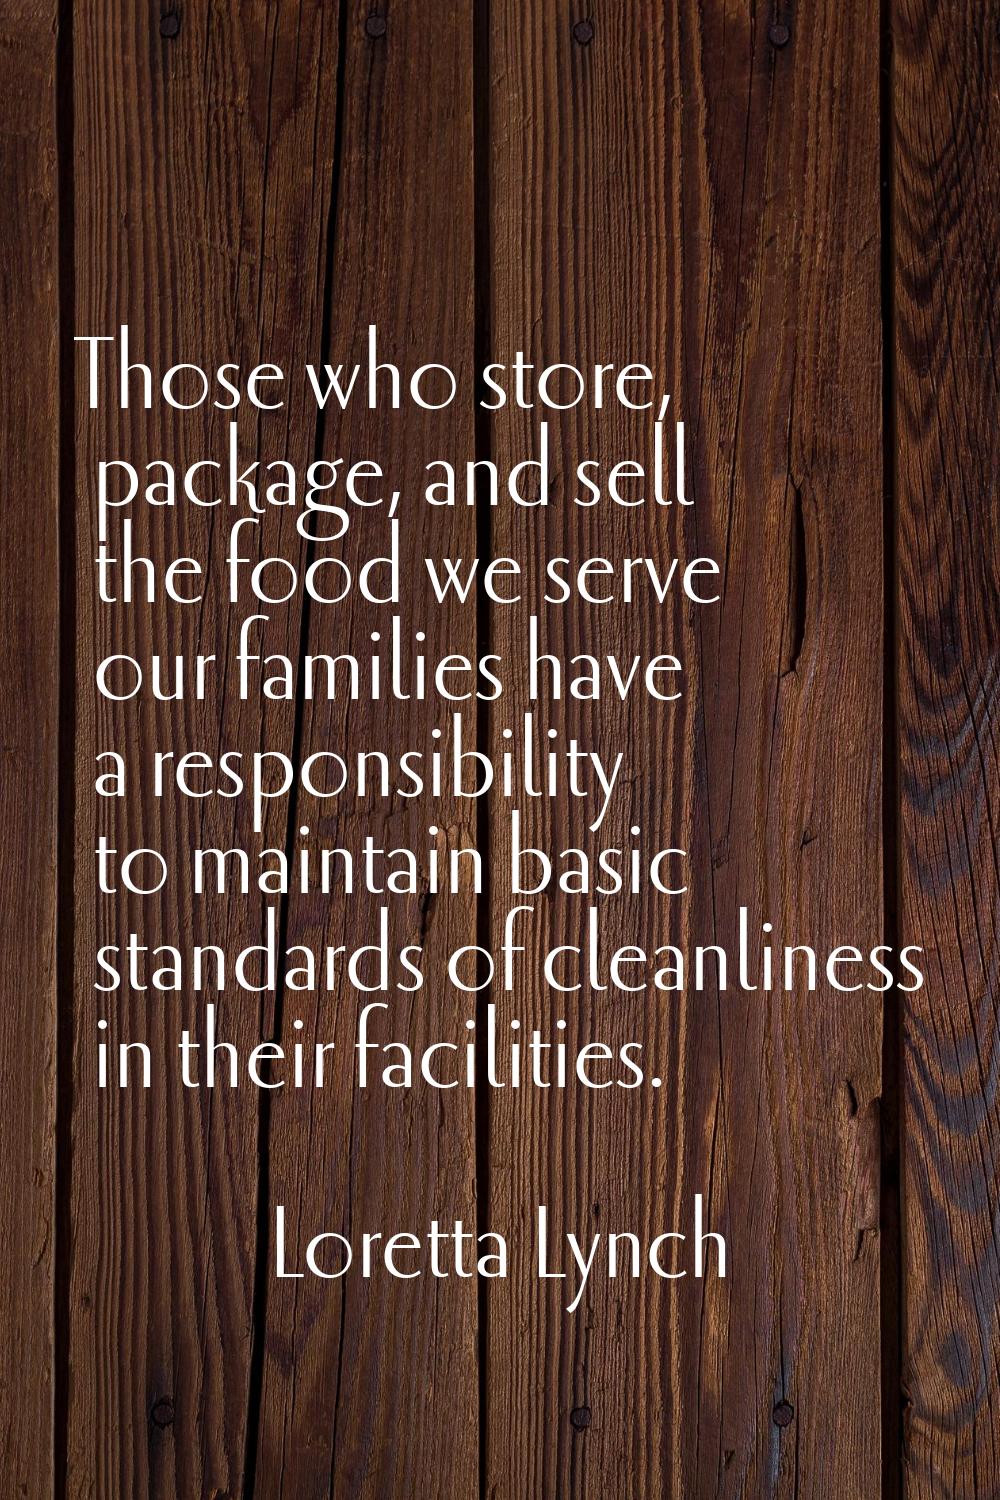 Those who store, package, and sell the food we serve our families have a responsibility to maintain